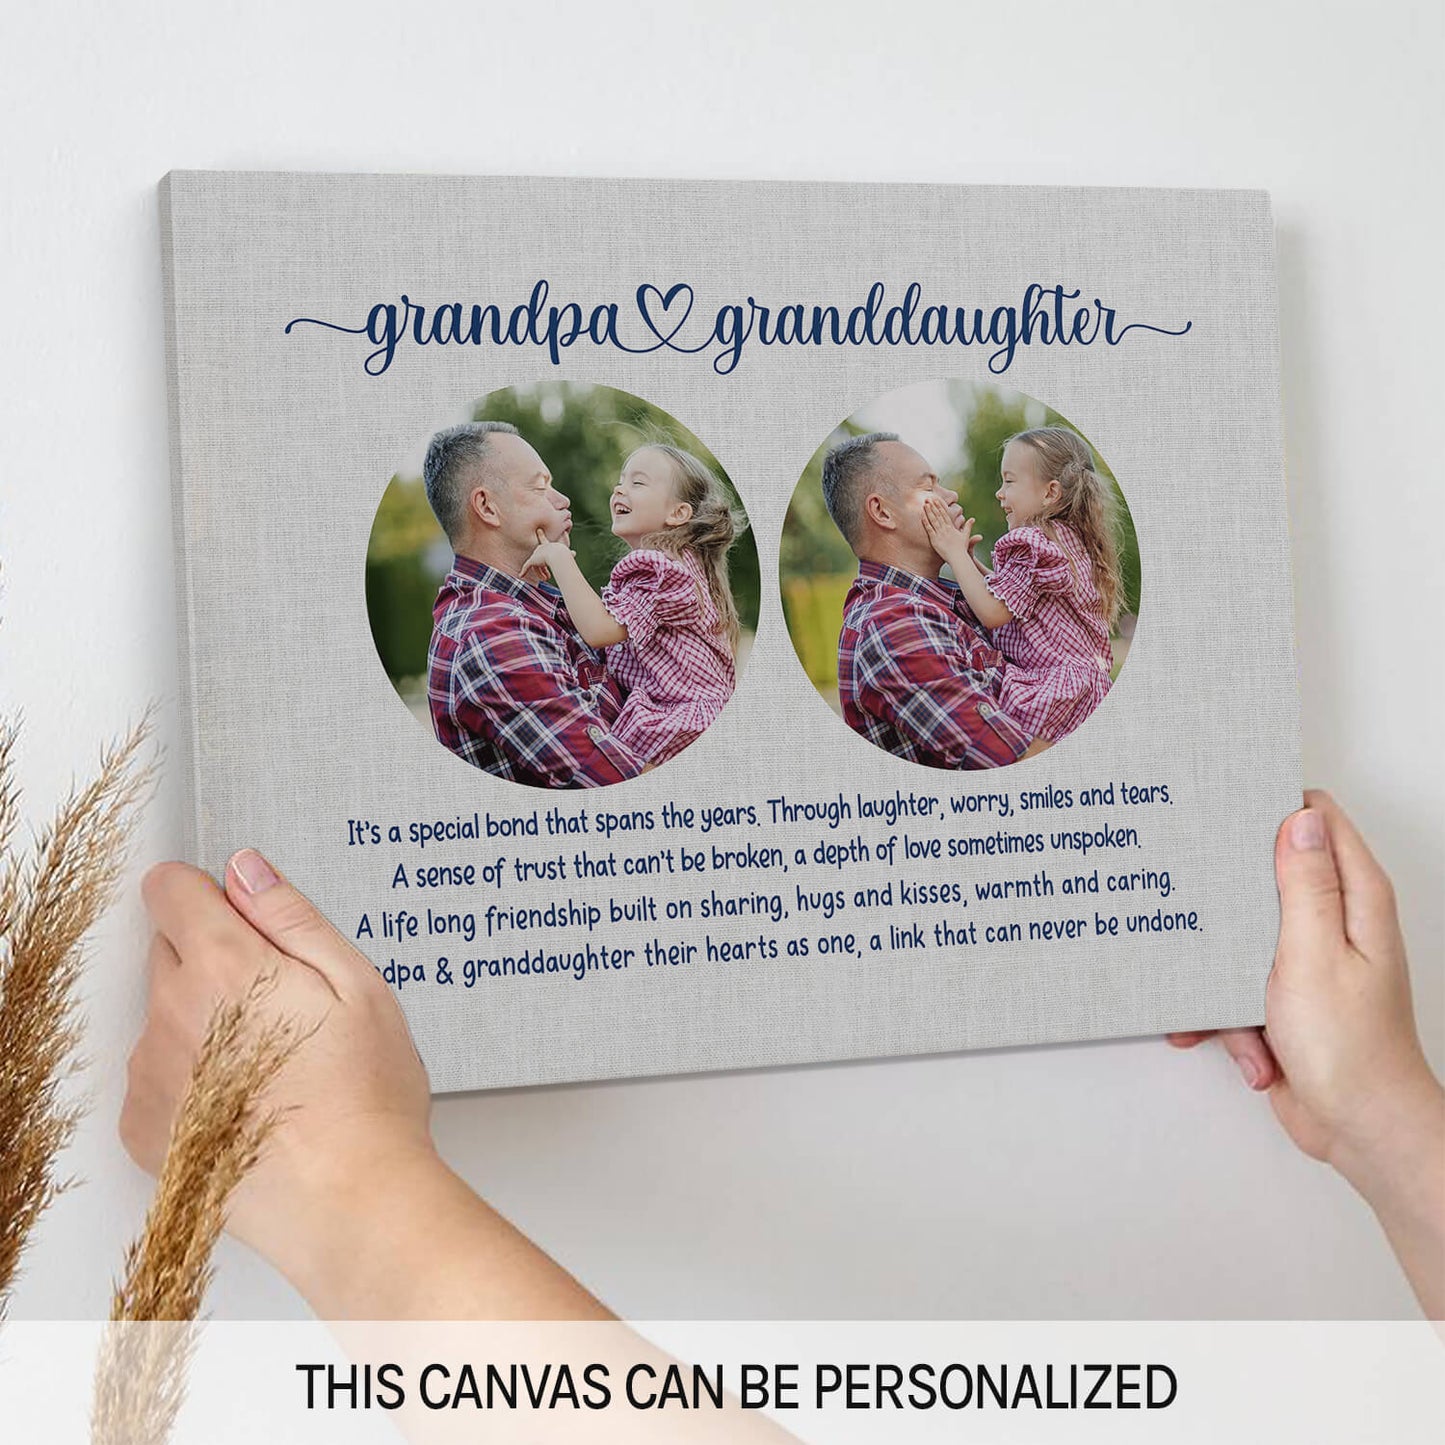 Grandpa & Granddaughter - Personalized Father's Day or Birthday gift for Grandpa - Custom Canvas Print - MyMindfulGifts